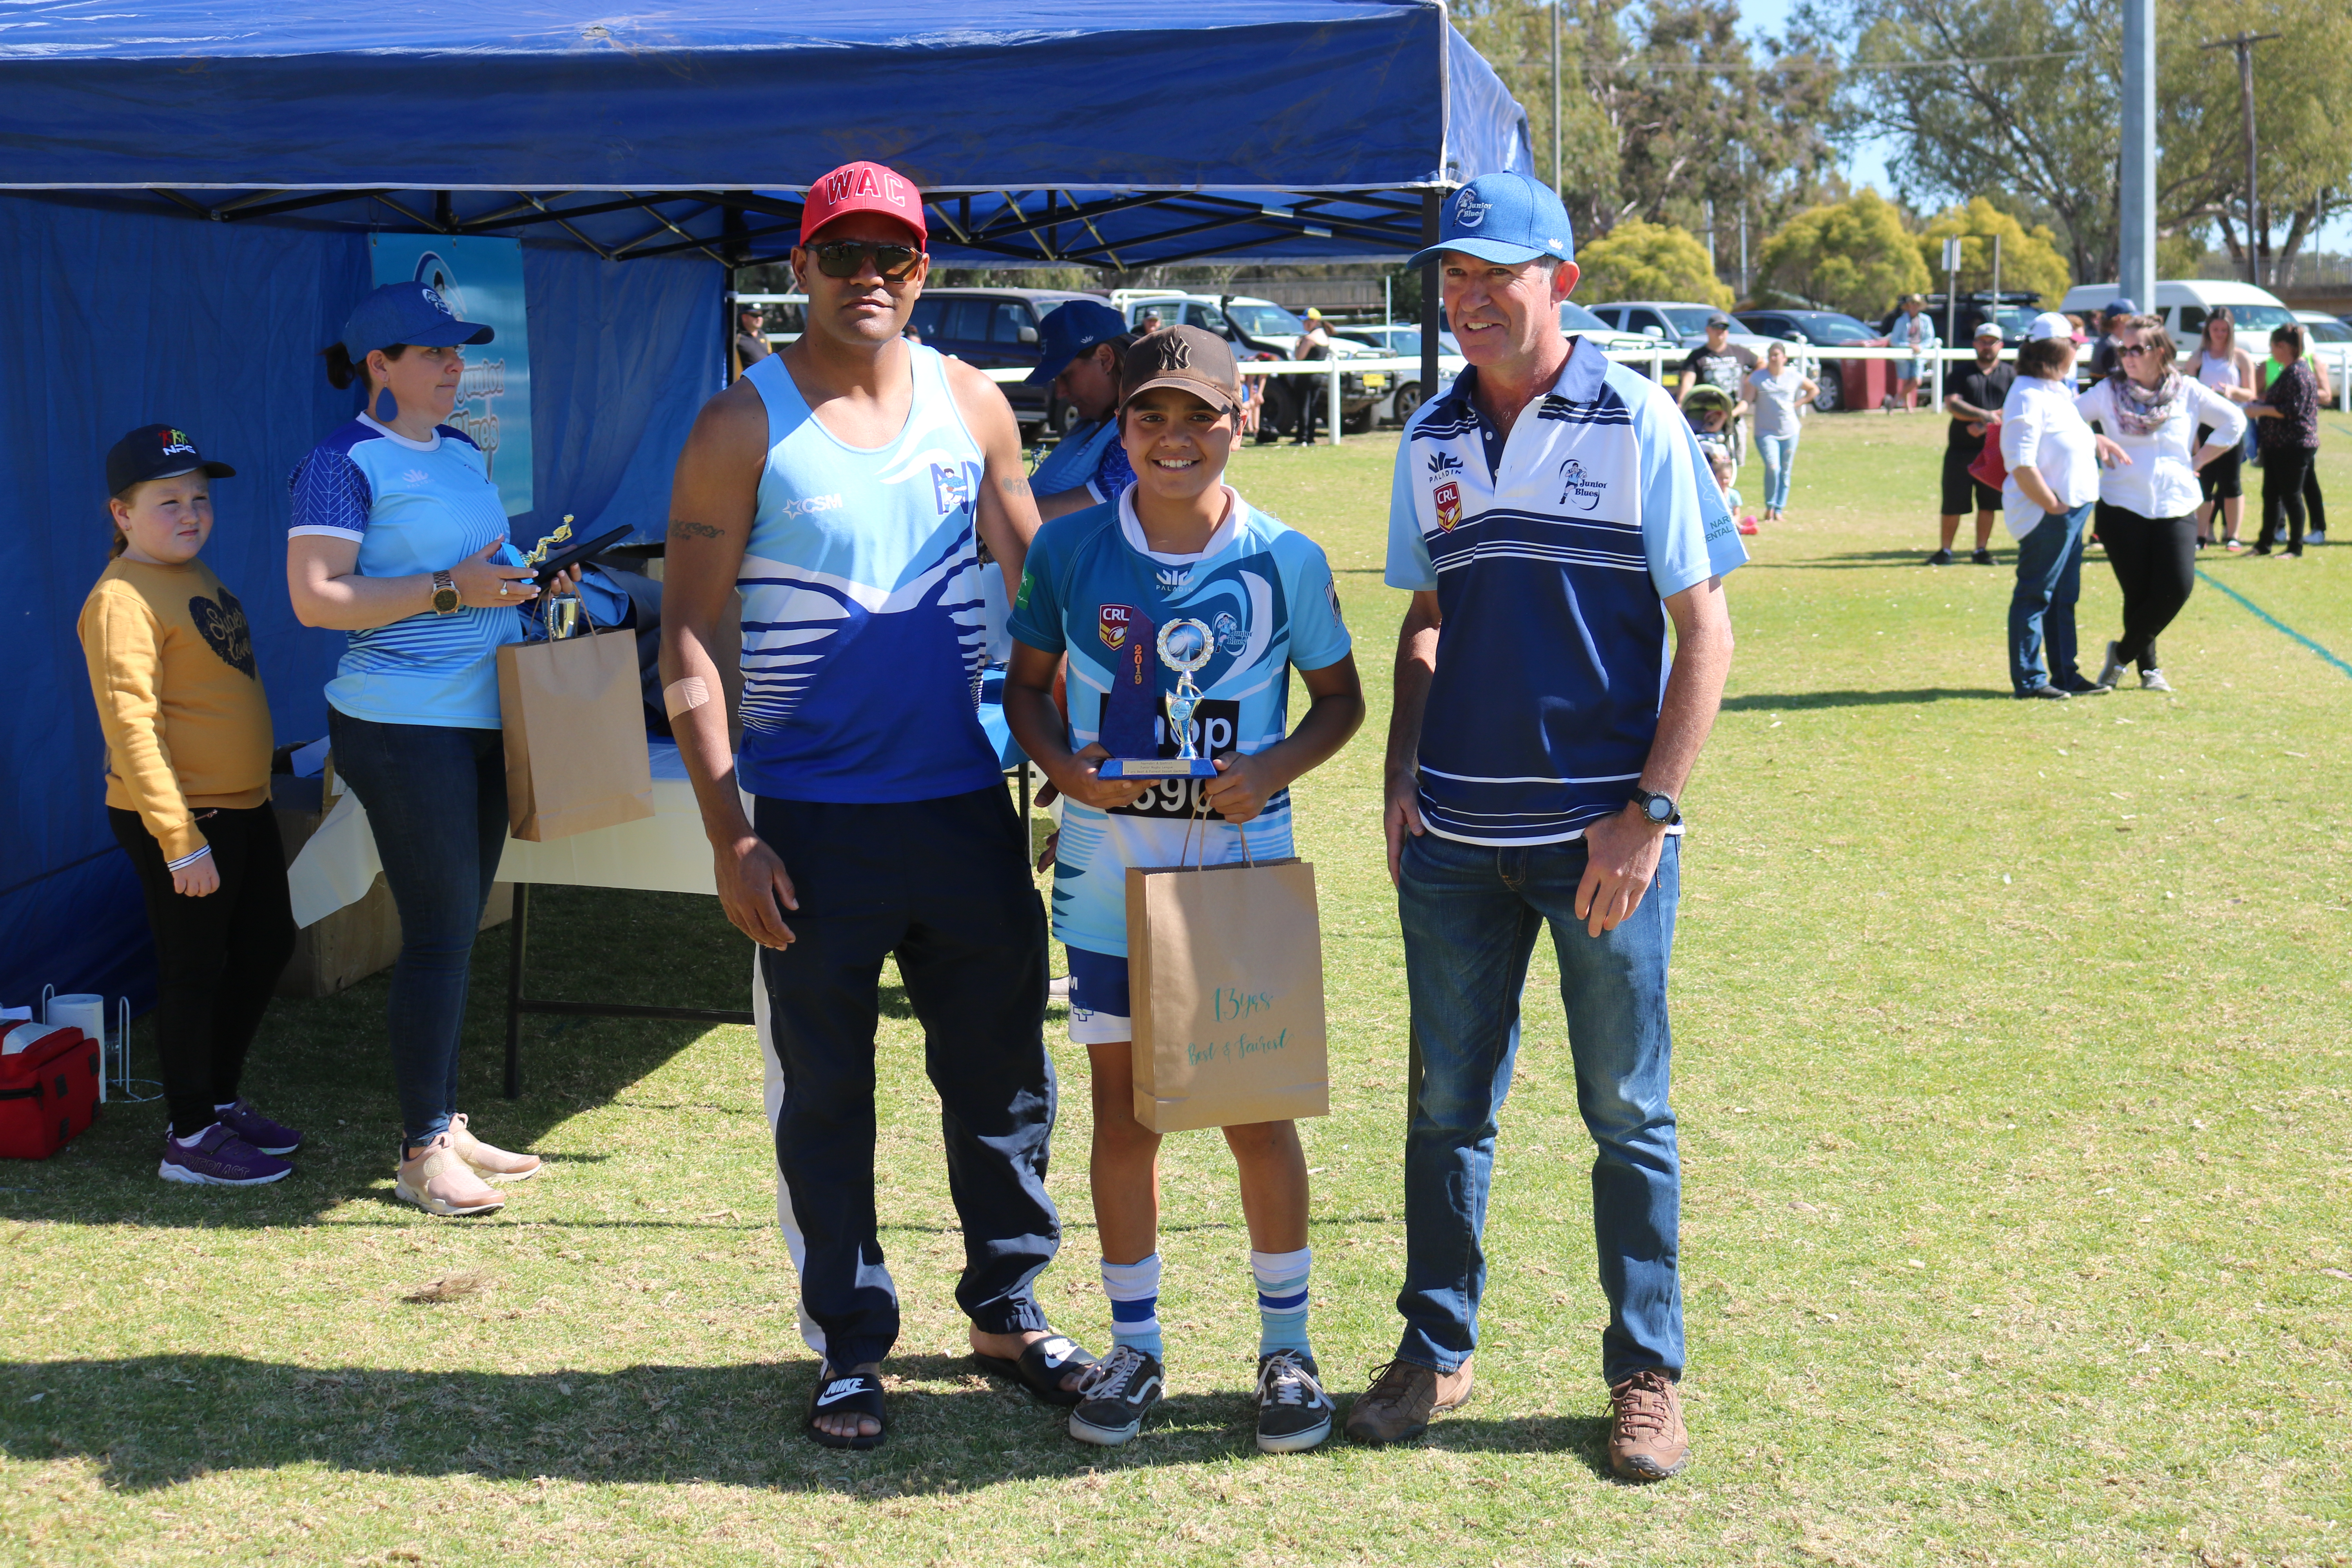 Awards galore at the junior league grand final day